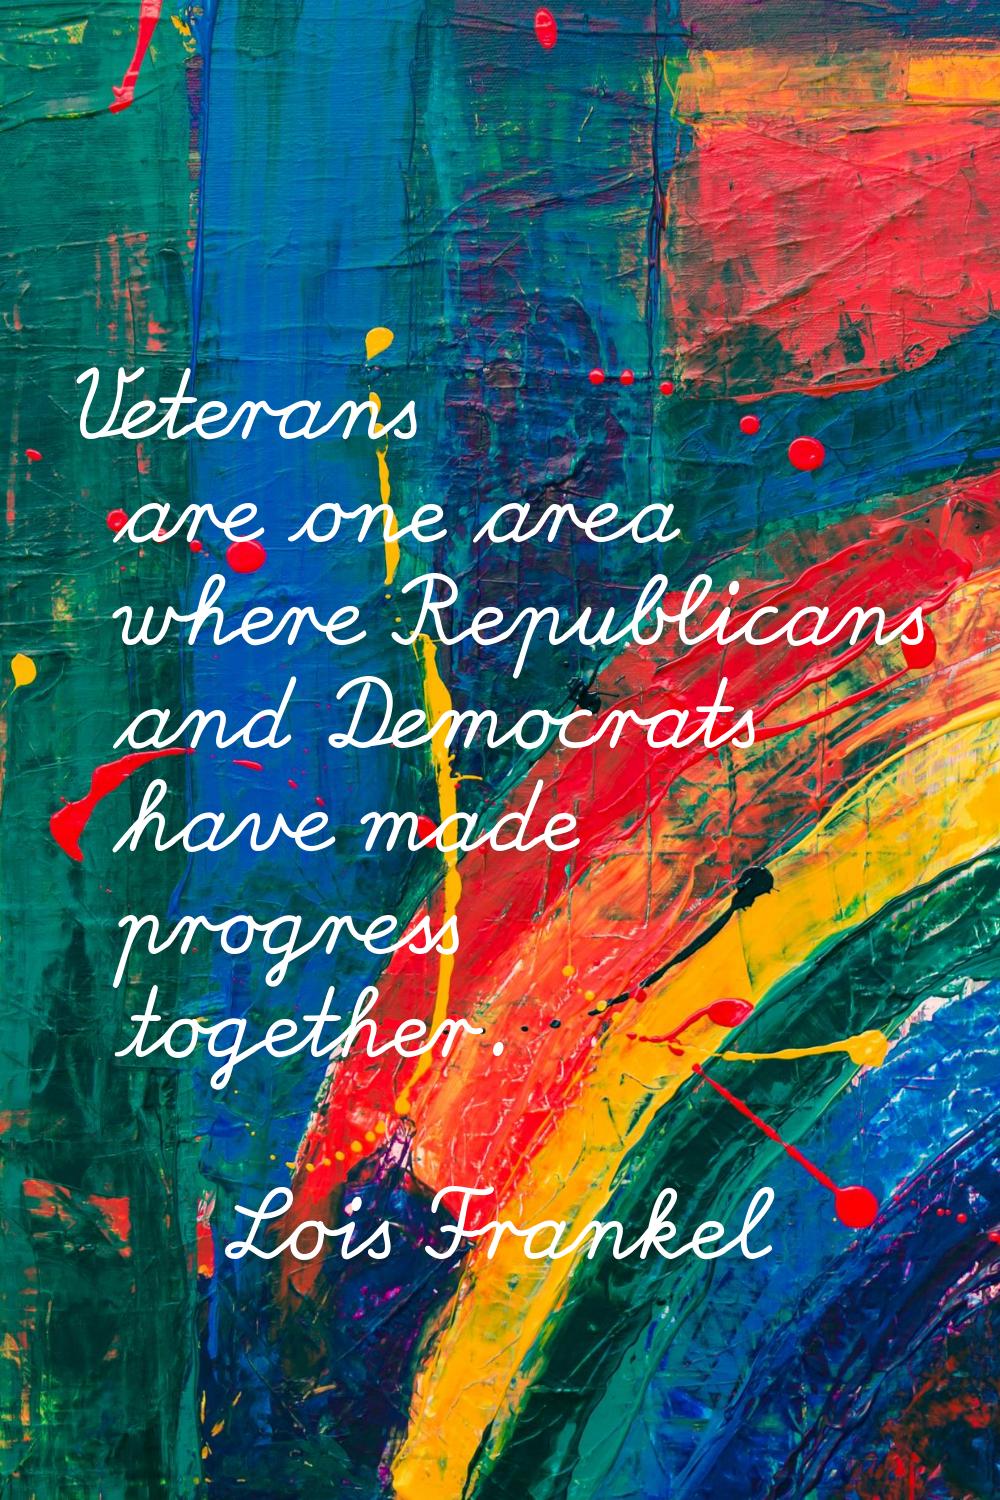 Veterans are one area where Republicans and Democrats have made progress together.